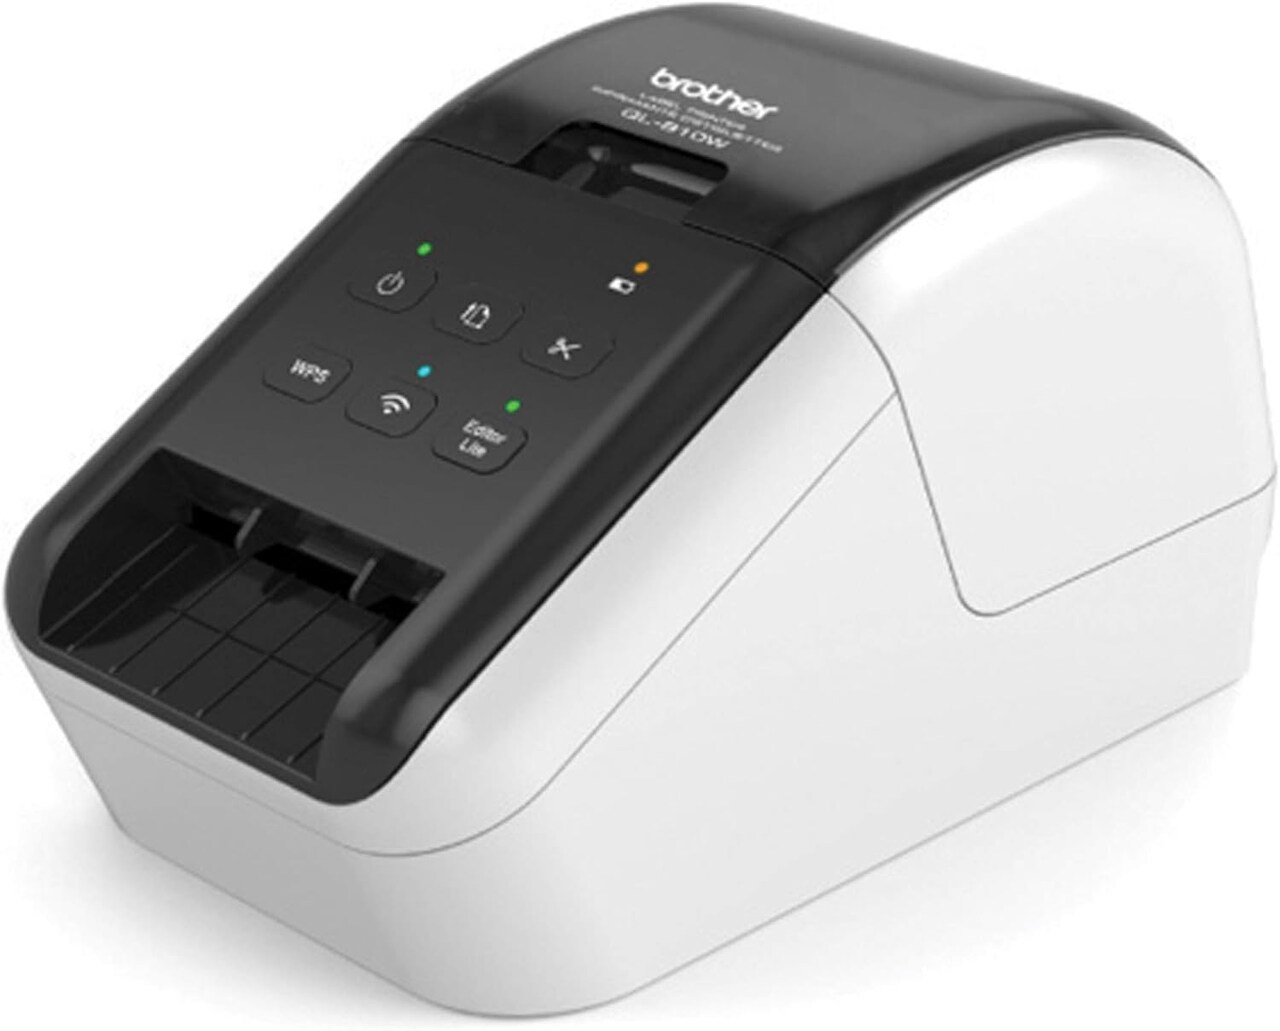 Brother&#xAE; Wireless Printer - Black | Best Fast Electronic Label Maker (QL810W)